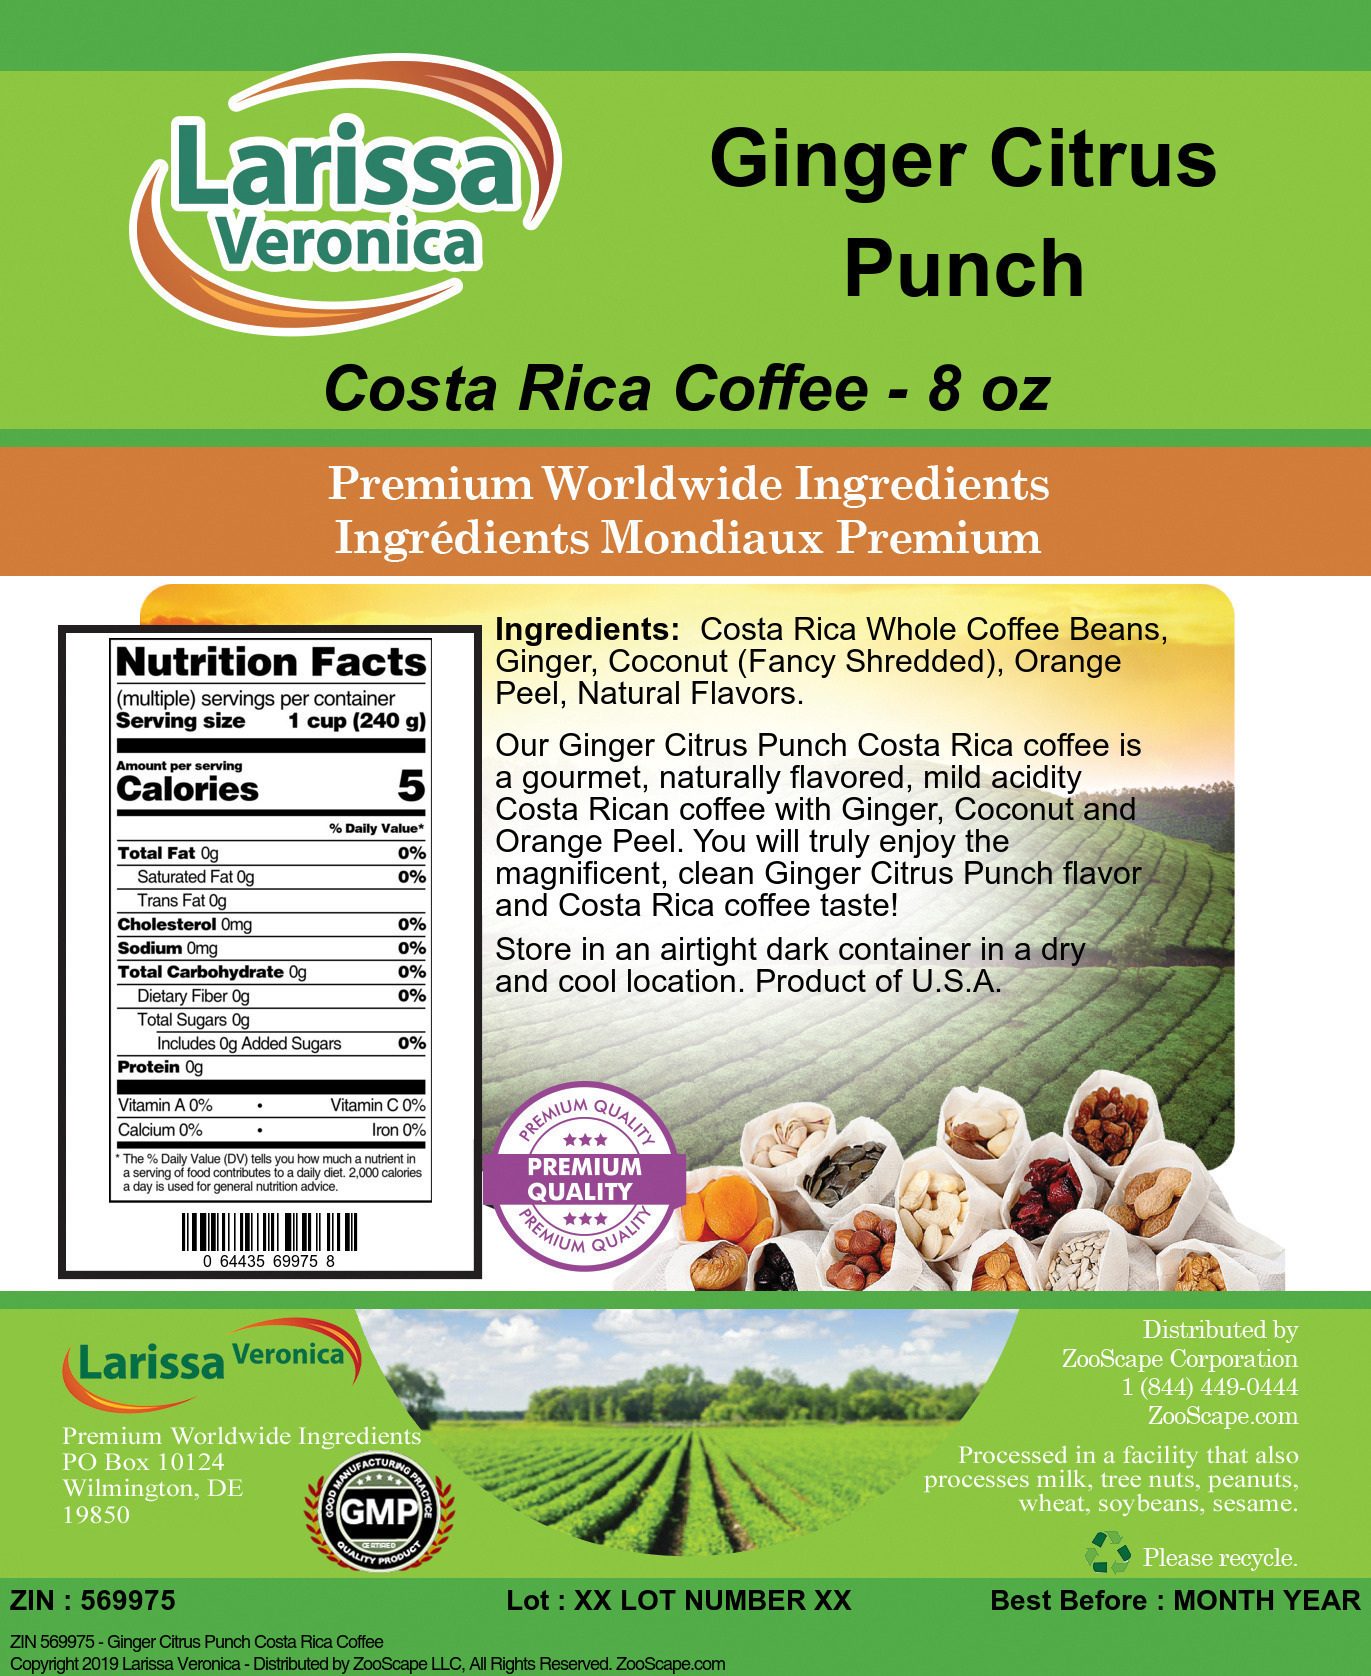 Ginger Citrus Punch Costa Rica Coffee - Label